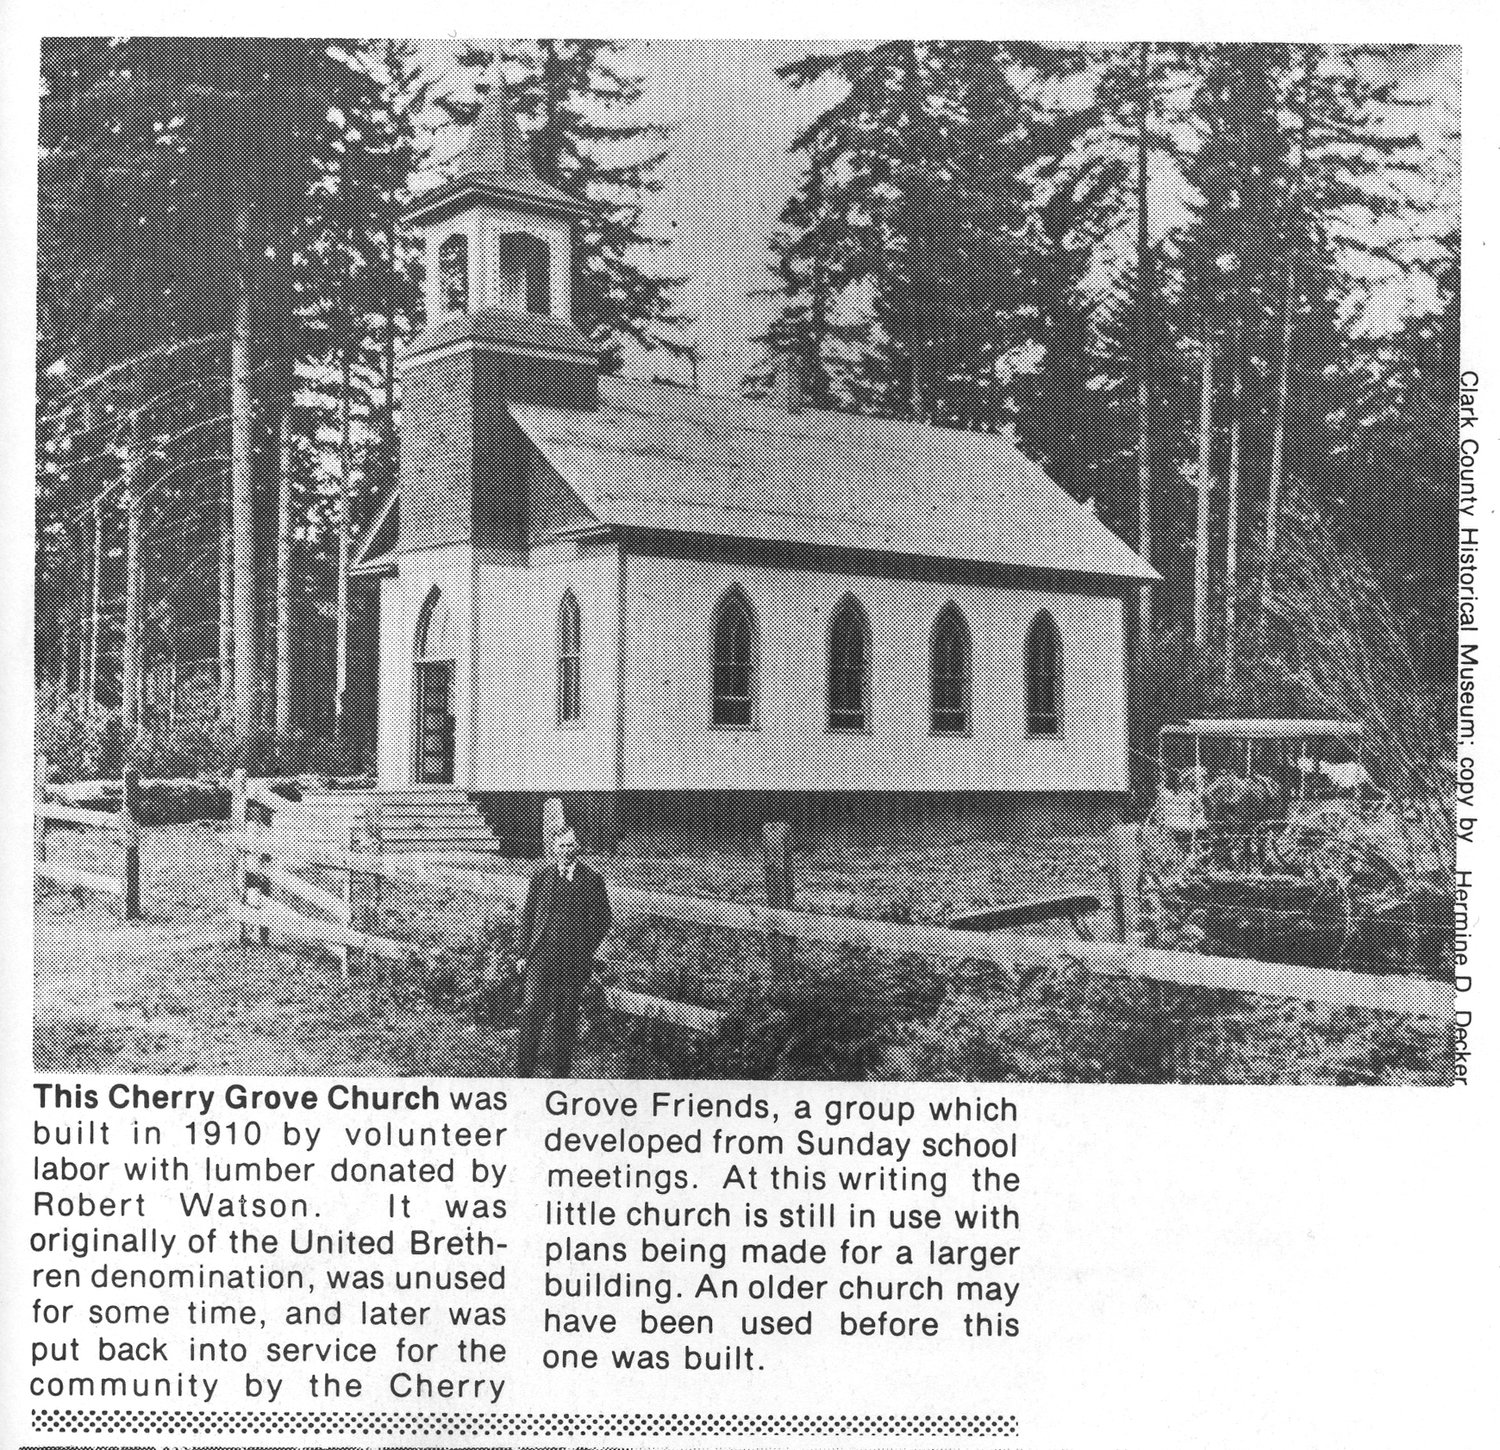 According to “Battle Ground...In and Around,” a book detailing a history of the area, the church that was destroyed by a fire on Monday was built in 1910 by volunteer labor and donated lumber from Robert Watson.